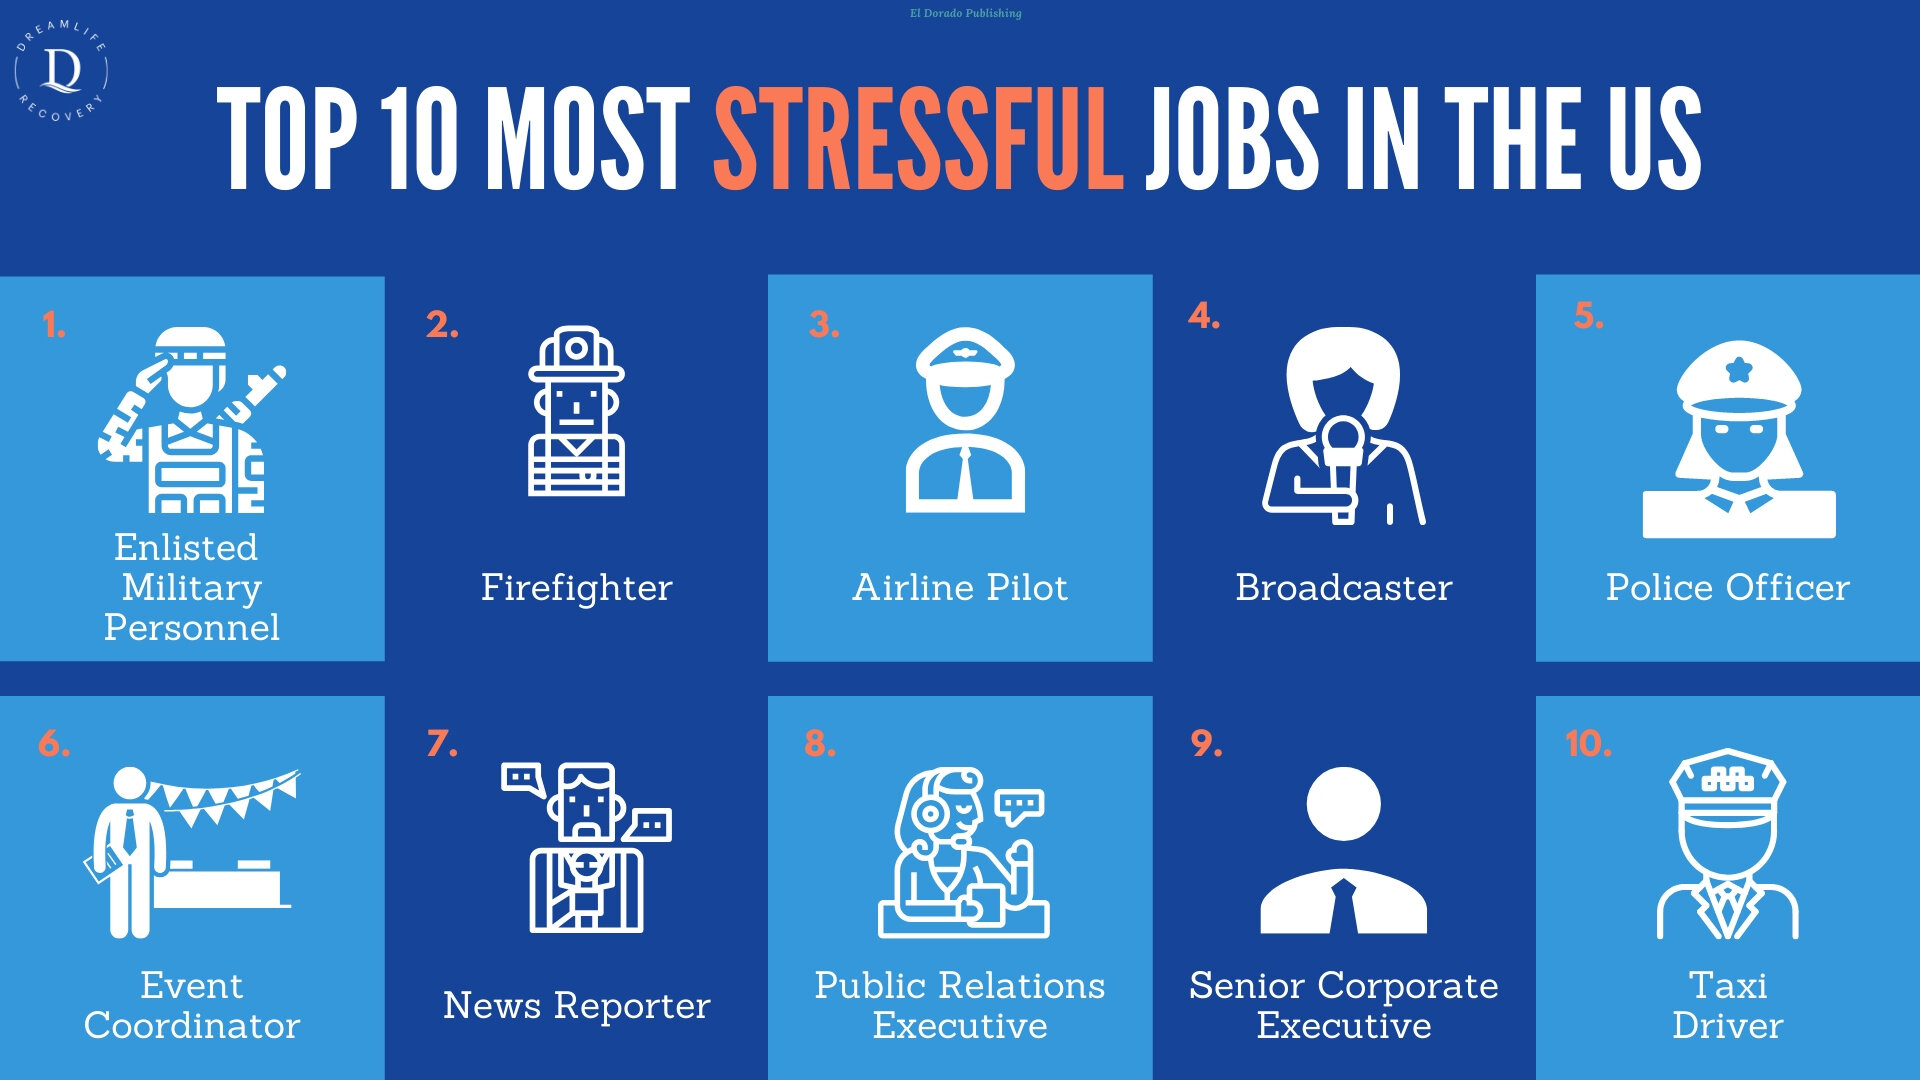 Top 10 most stressful jobs in the us.jpg